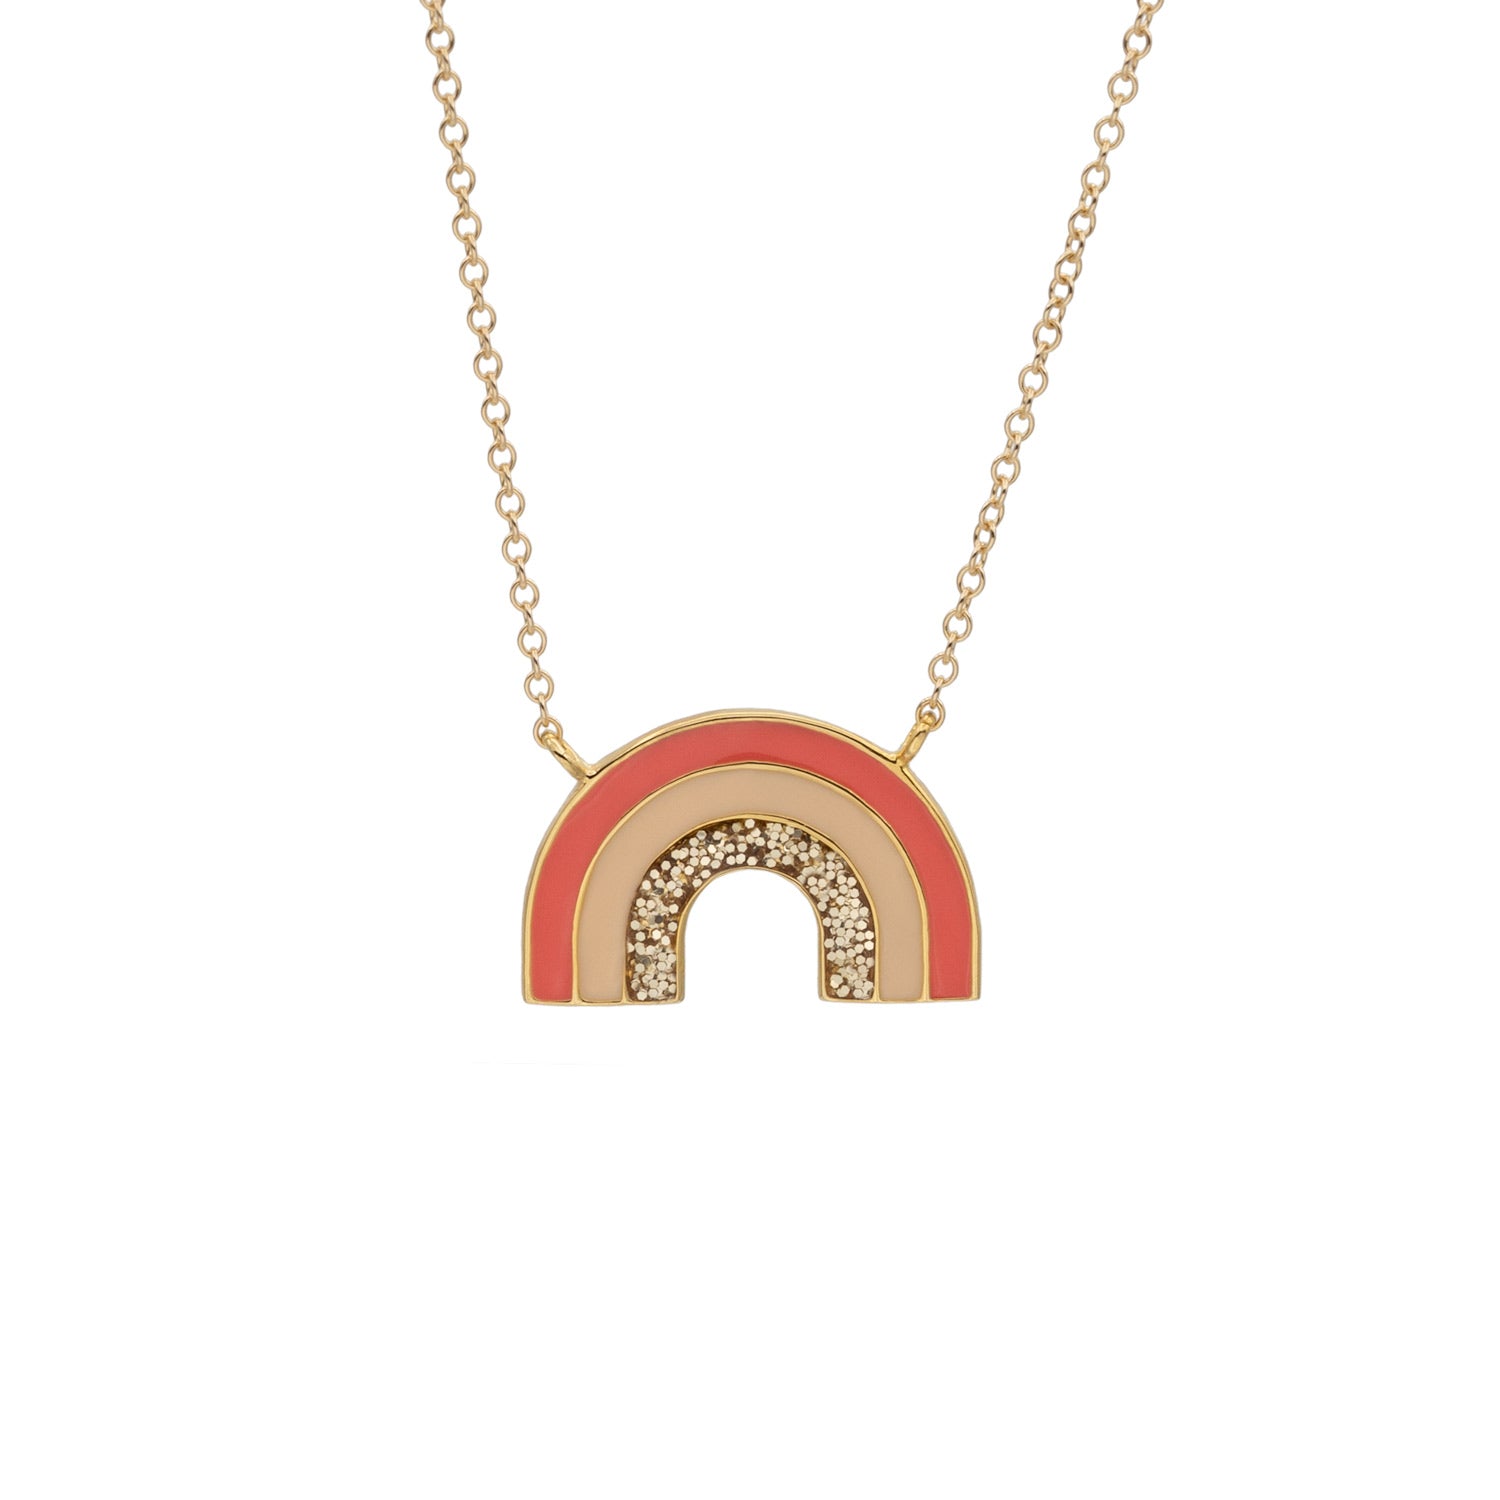 gold rainbow necklace in coral peach and gold glitter enamel